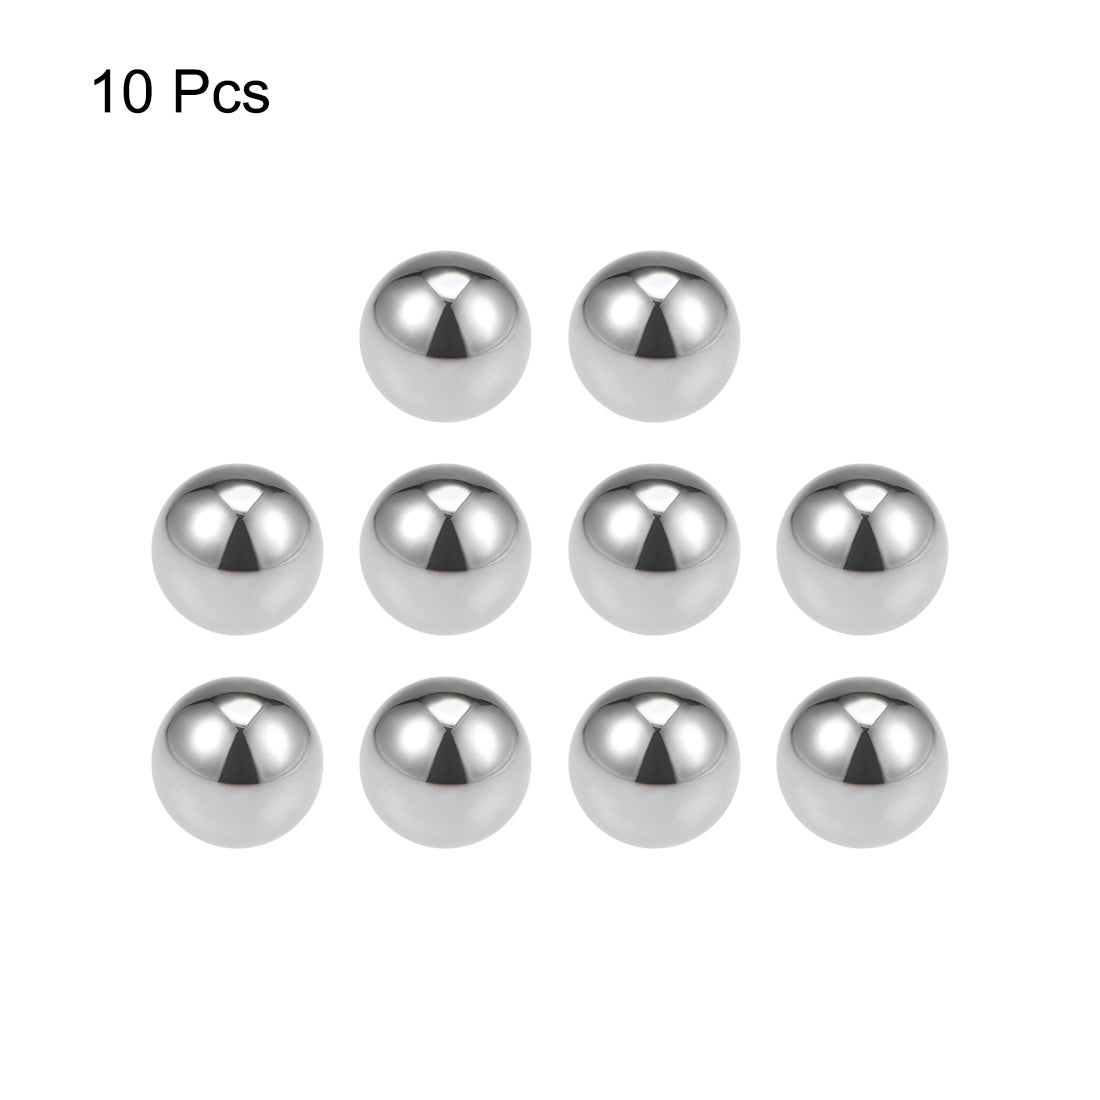 uxcell Uxcell Precision Balls 19/32" Solid Chrome Steel G10 for Ball Bearing Wheel 10pcs